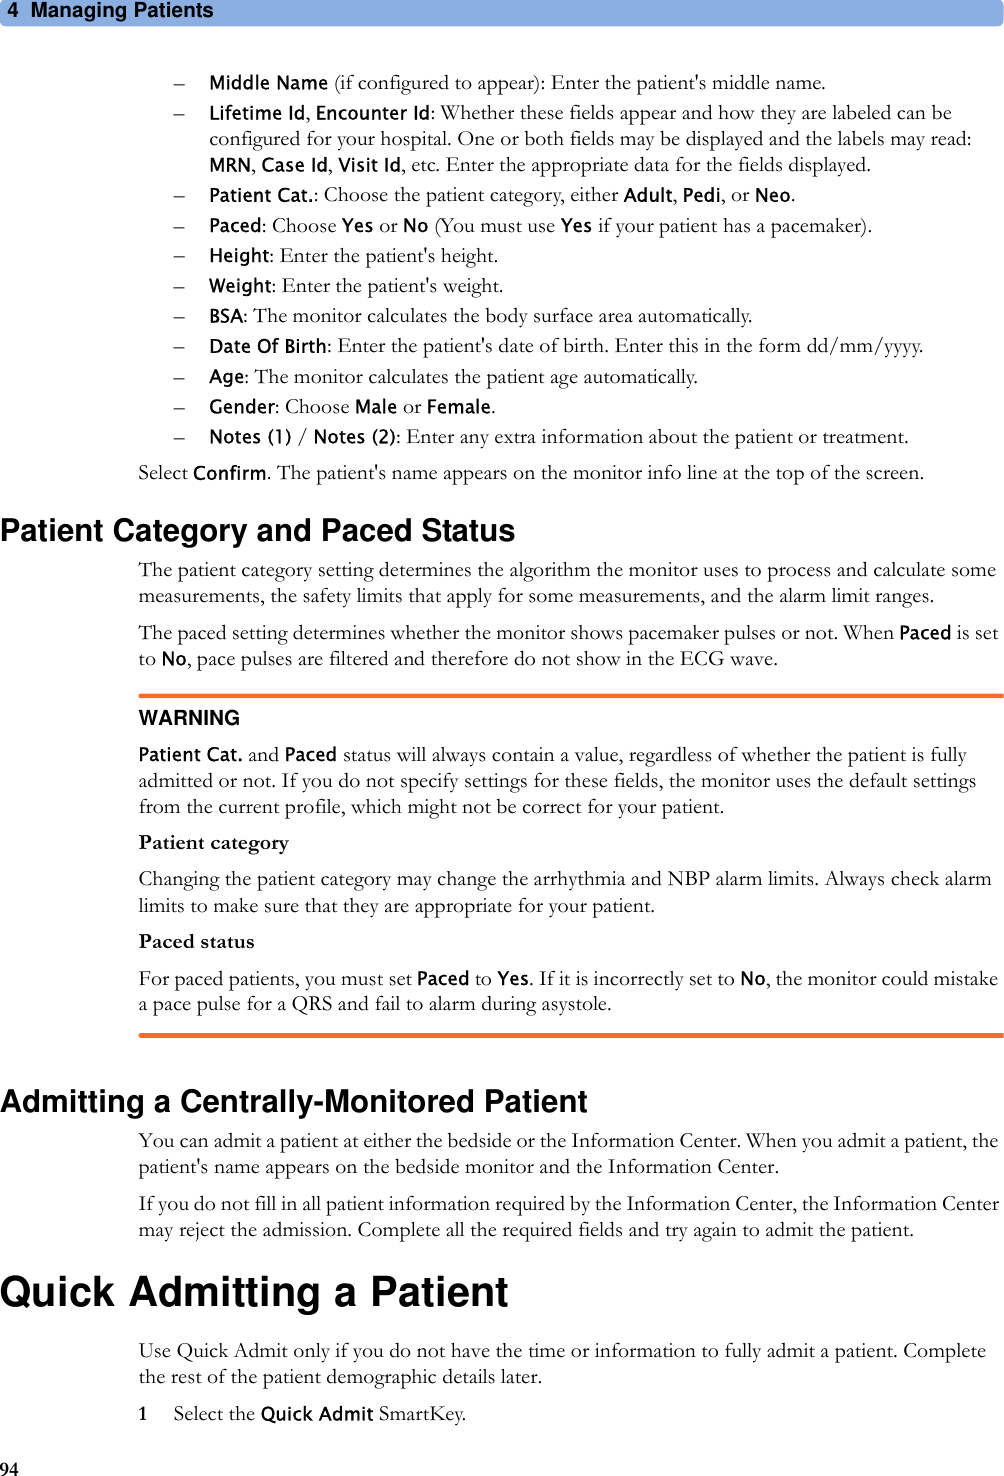 4 Managing Patients94–Middle Name (if configured to appear): Enter the patient&apos;s middle name.–Lifetime Id, Encounter Id: Whether these fields appear and how they are labeled can be configured for your hospital. One or both fields may be displayed and the labels may read: MRN, Case Id, Visit Id, etc. Enter the appropriate data for the fields displayed.–Patient Cat.: Choose the patient category, either Adult, Pedi, or Neo.–Paced: Choose Yes or No (You must use Yes if your patient has a pacemaker).–Height: Enter the patient&apos;s height.–Weight: Enter the patient&apos;s weight.–BSA: The monitor calculates the body surface area automatically.–Date Of Birth: Enter the patient&apos;s date of birth. Enter this in the form dd/mm/yyyy.–Age: The monitor calculates the patient age automatically.–Gender: Choose Male or Female.–Notes (1) / Notes (2): Enter any extra information about the patient or treatment.Select Confirm. The patient&apos;s name appears on the monitor info line at the top of the screen.Patient Category and Paced StatusThe patient category setting determines the algorithm the monitor uses to process and calculate some measurements, the safety limits that apply for some measurements, and the alarm limit ranges.The paced setting determines whether the monitor shows pacemaker pulses or not. When Paced is set to No, pace pulses are filtered and therefore do not show in the ECG wave.WARNINGPatient Cat. and Paced status will always contain a value, regardless of whether the patient is fully admitted or not. If you do not specify settings for these fields, the monitor uses the default settings from the current profile, which might not be correct for your patient.Patient categoryChanging the patient category may change the arrhythmia and NBP alarm limits. Always check alarm limits to make sure that they are appropriate for your patient.Paced statusFor paced patients, you must set Paced to Yes. If it is incorrectly set to No, the monitor could mistake a pace pulse for a QRS and fail to alarm during asystole.Admitting a Centrally-Monitored PatientYou can admit a patient at either the bedside or the Information Center. When you admit a patient, the patient&apos;s name appears on the bedside monitor and the Information Center.If you do not fill in all patient information required by the Information Center, the Information Center may reject the admission. Complete all the required fields and try again to admit the patient.Quick Admitting a PatientUse Quick Admit only if you do not have the time or information to fully admit a patient. Complete the rest of the patient demographic details later.1Select the Quick Admit SmartKey.